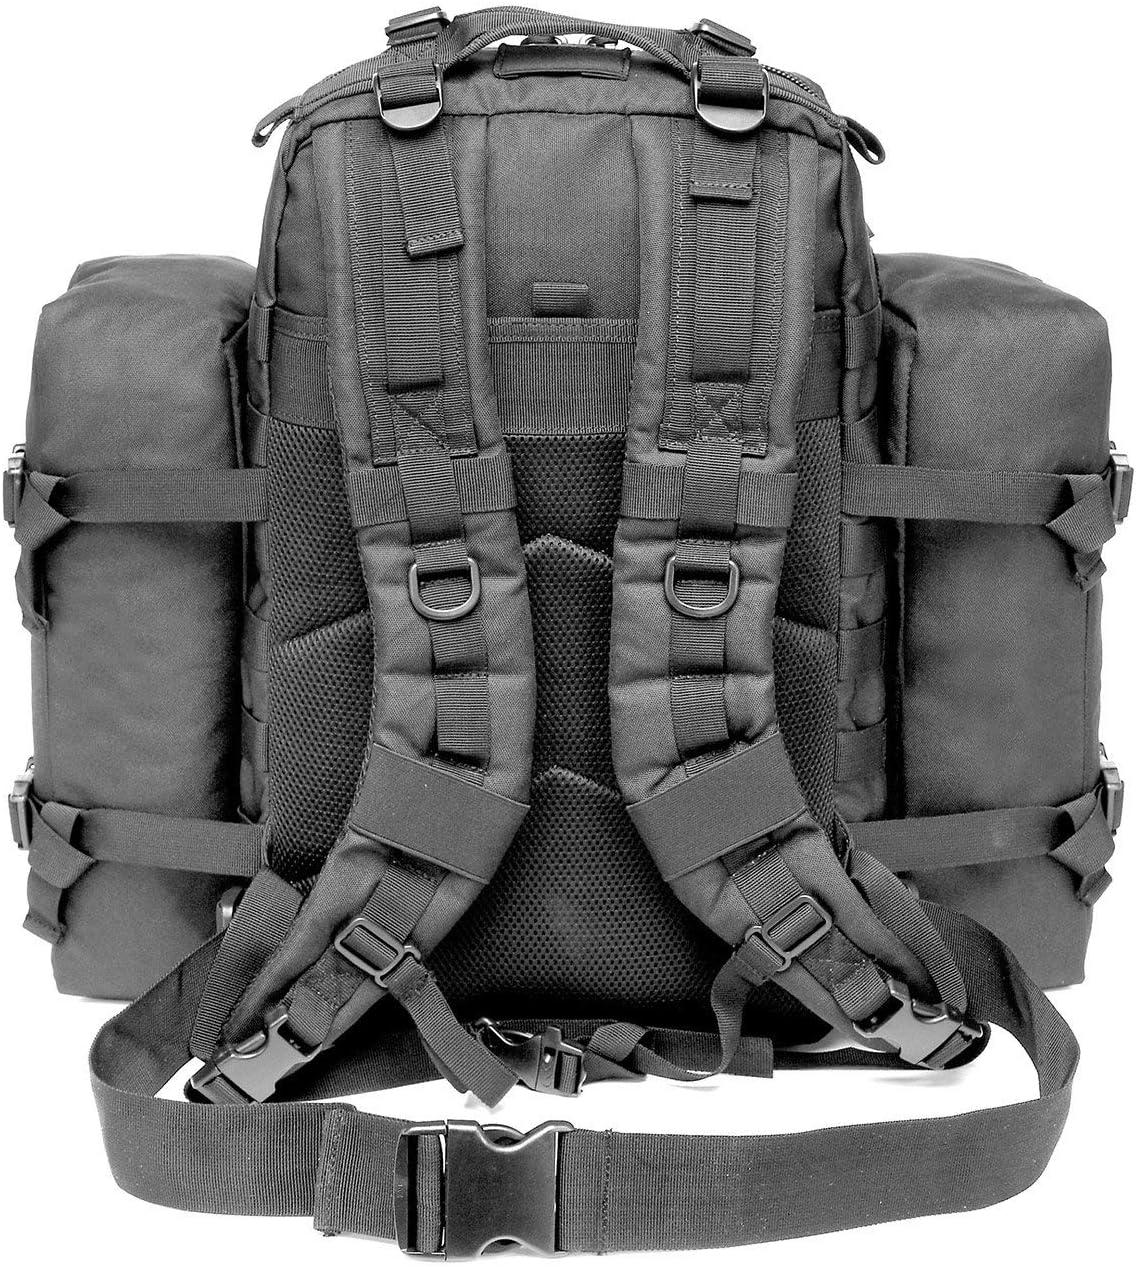 Military Tactical Backpack with 2 Detachable Packs, Army Assault Pack,  Large Fieldline Molle Bag, Polyester Tactical Bag 50L (with 2 detachable  bags) Black